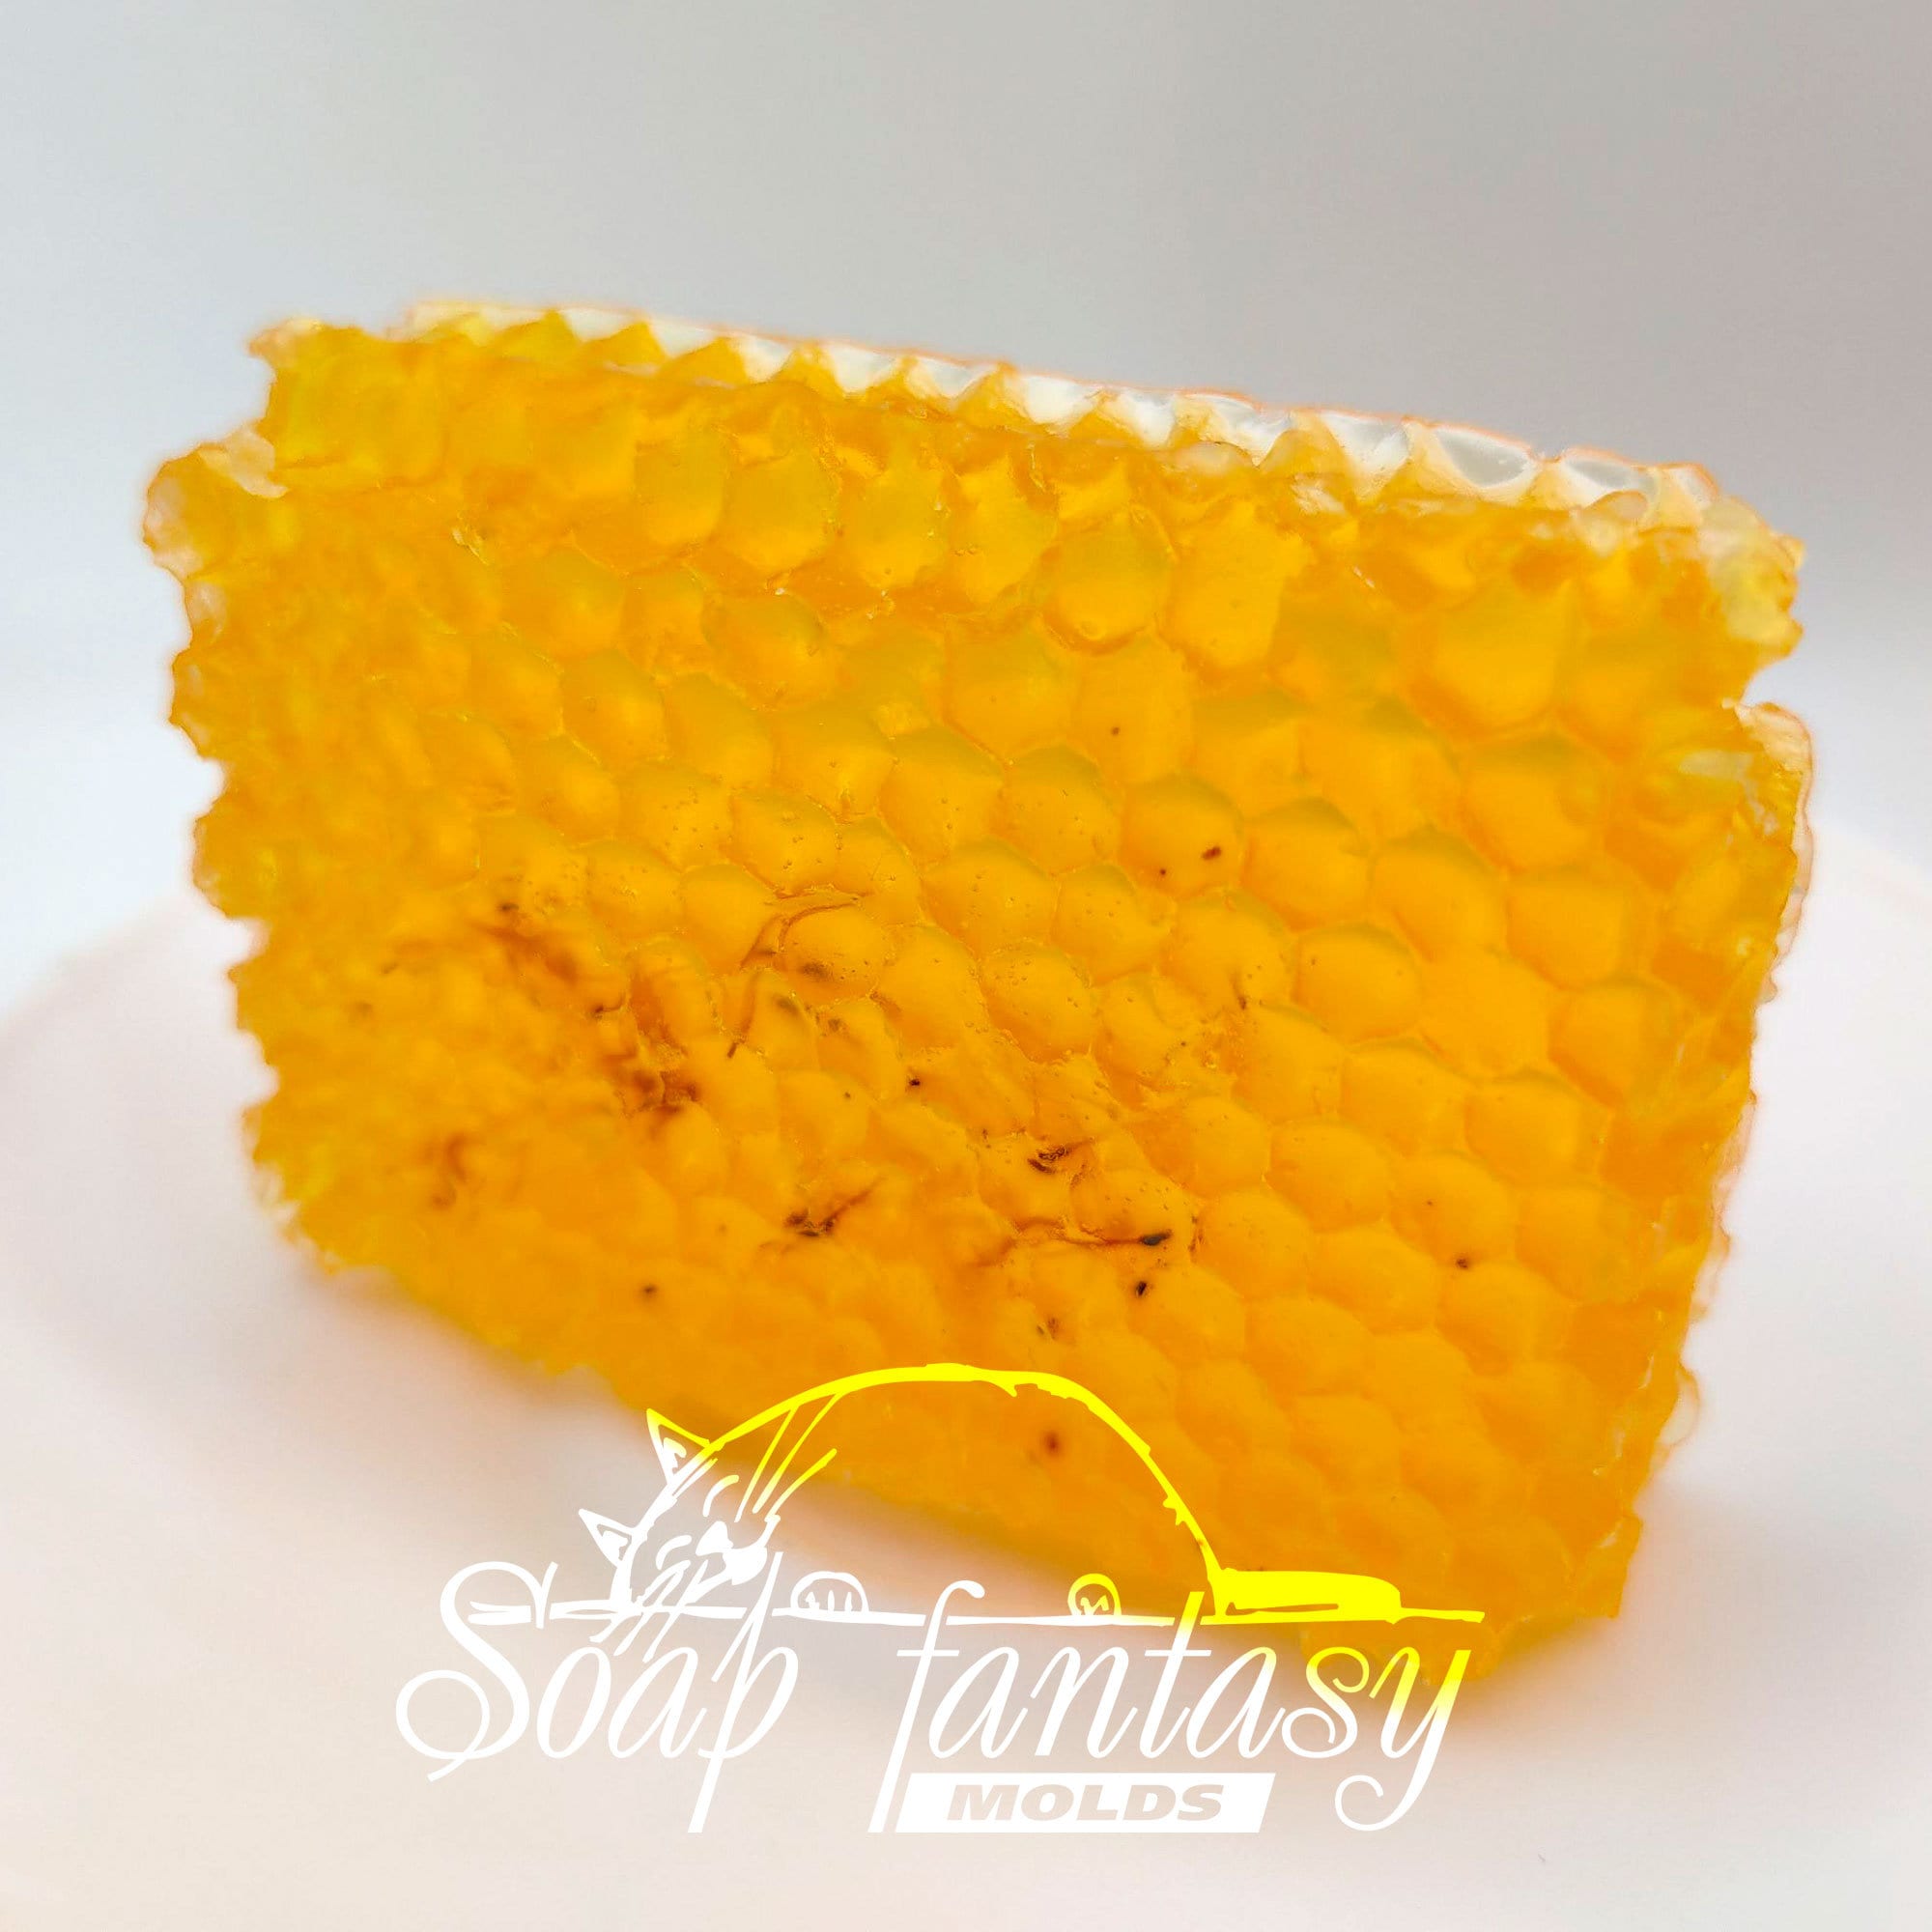 How to make your own honeycomb mould with silicone and wax